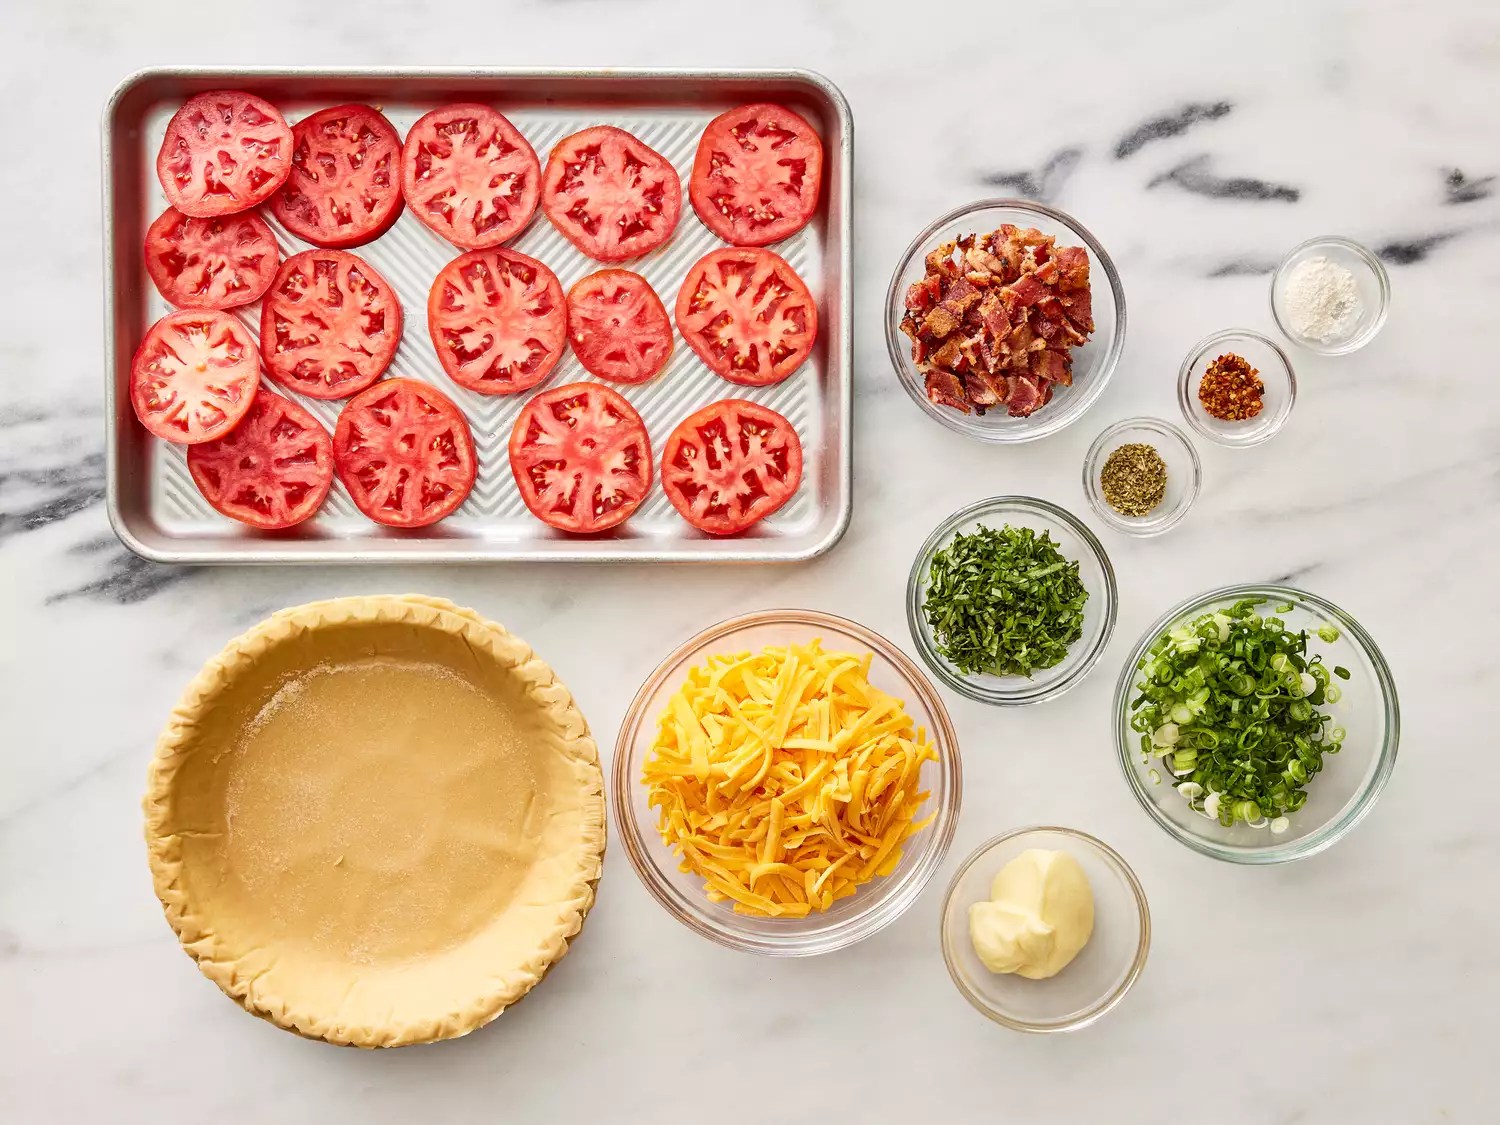 Unbelievably Delicious Tomato Pie Recipe – A Must Try!